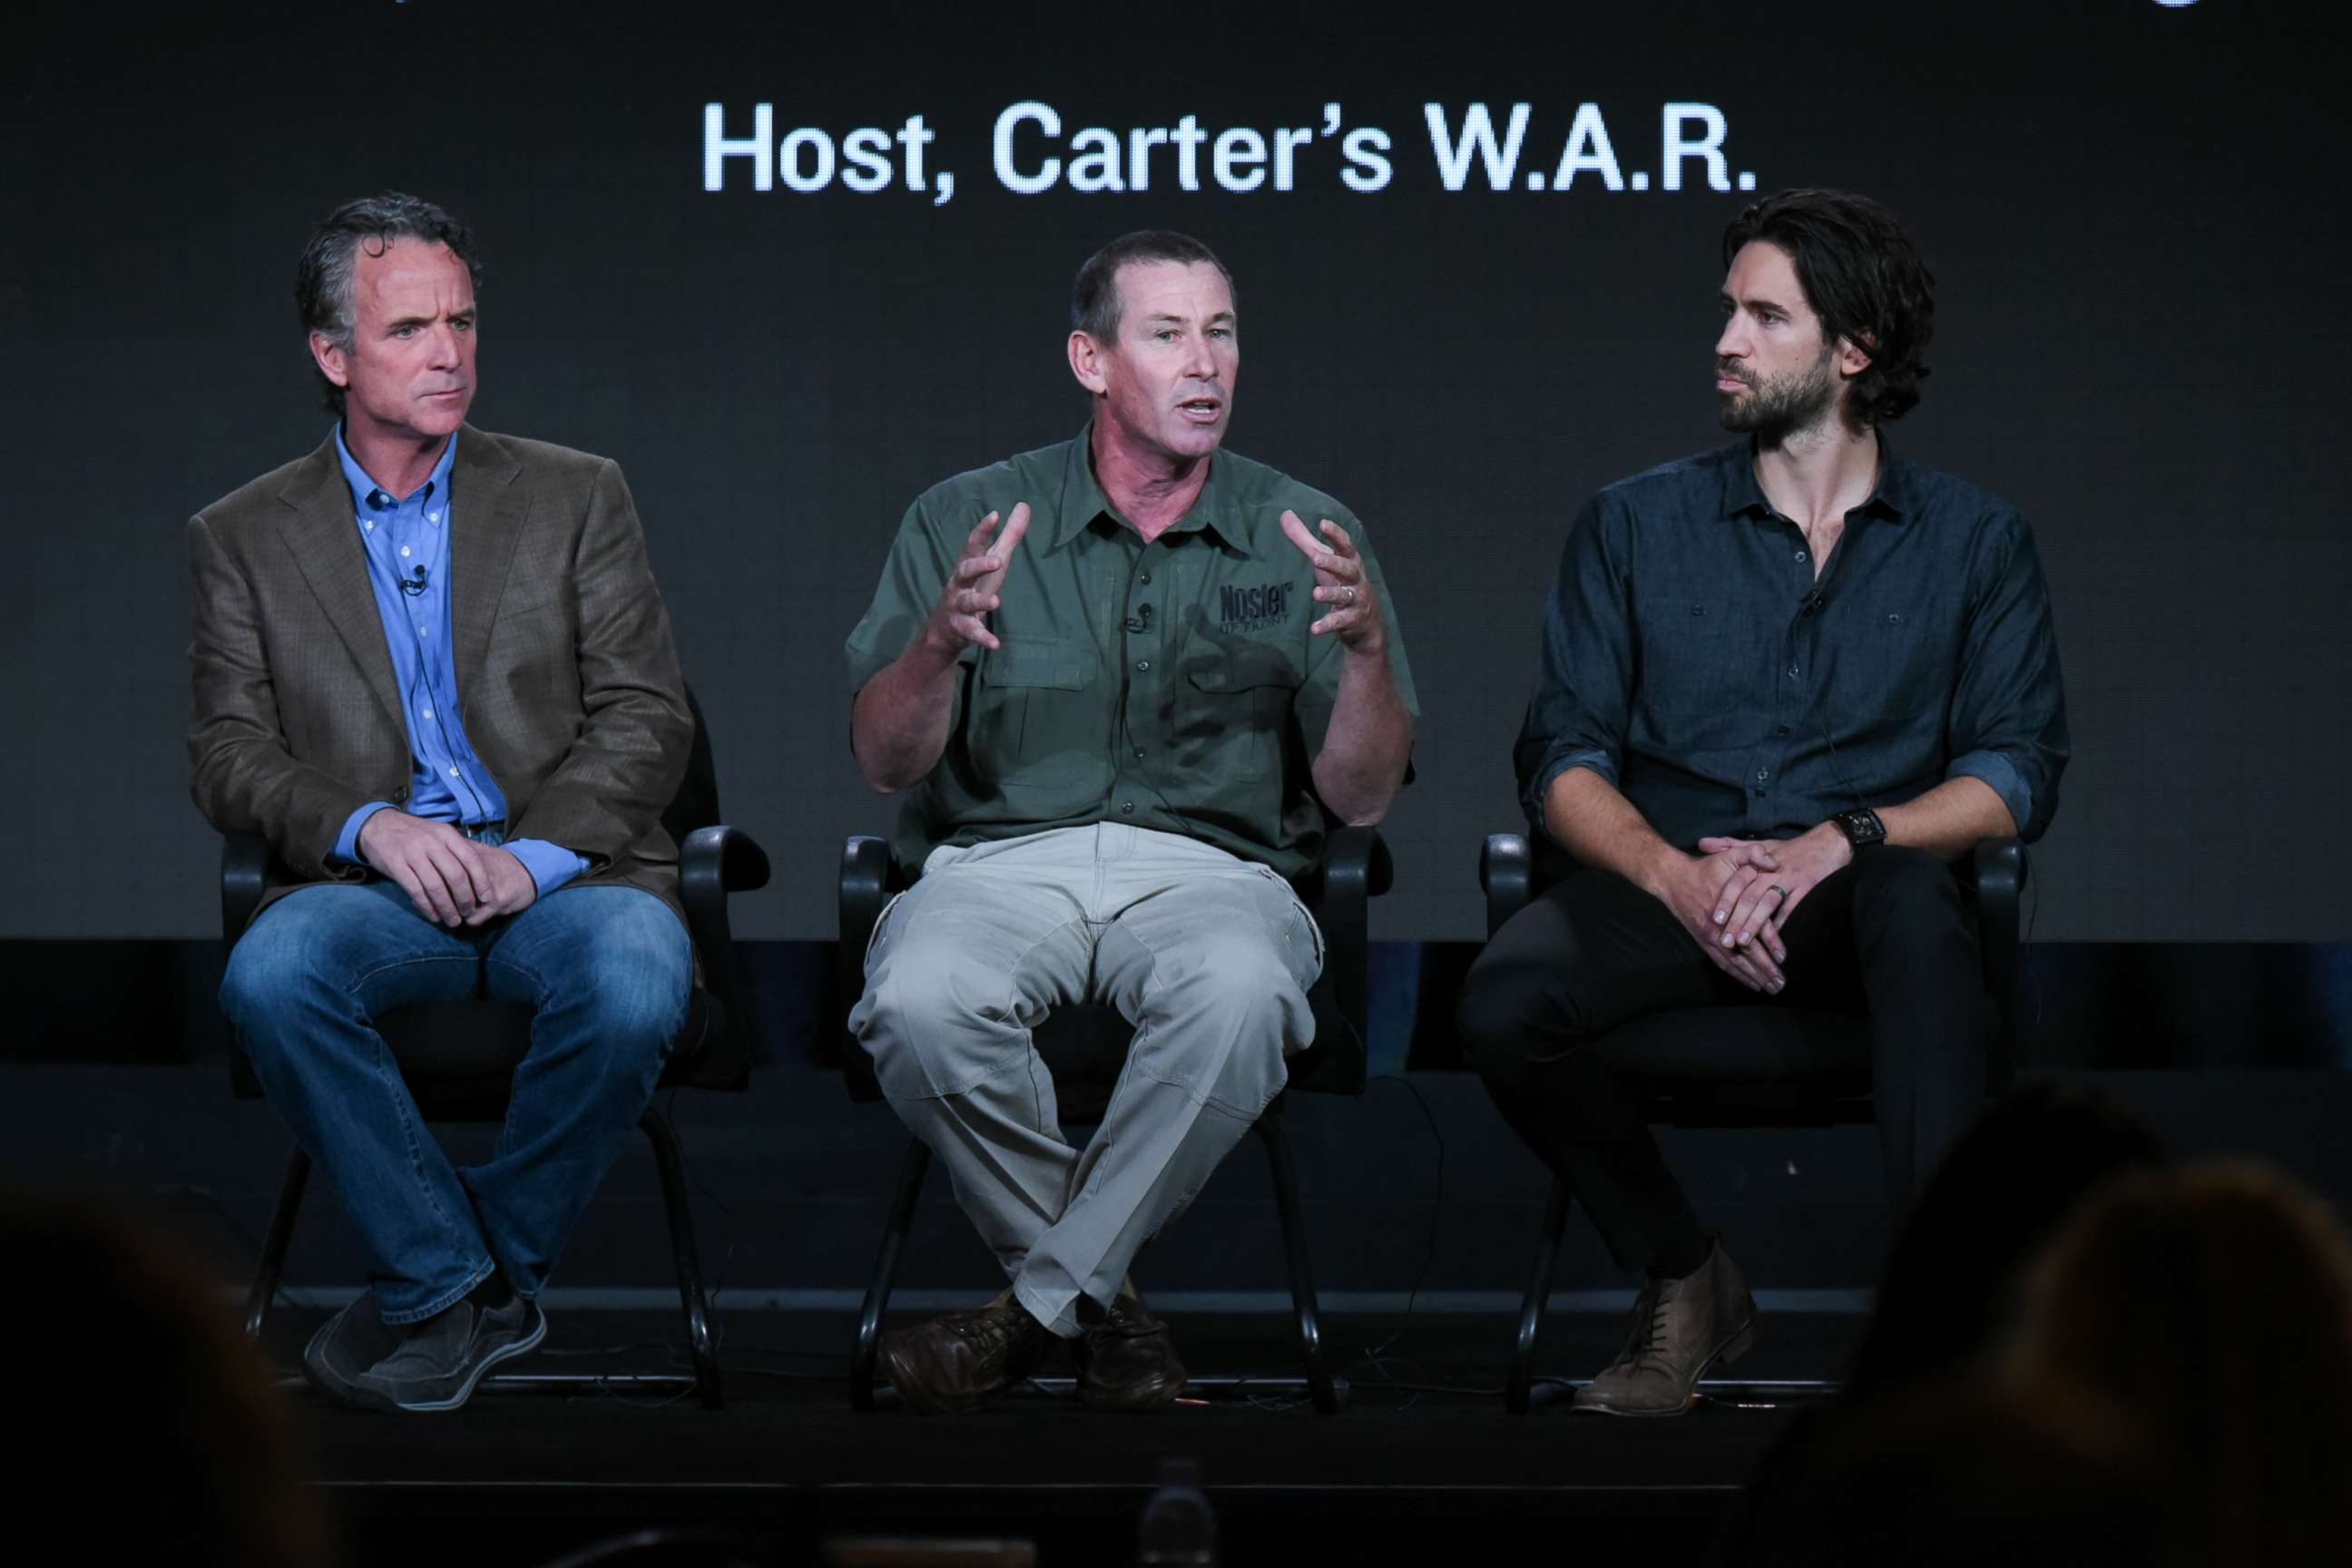 PHOTO: Jim Liberatore,speaks on stage during the "Carter's War" panel at the Outdoor Channel 2016 Winter TCA, Jan. 5, 2016, in Pasadena.